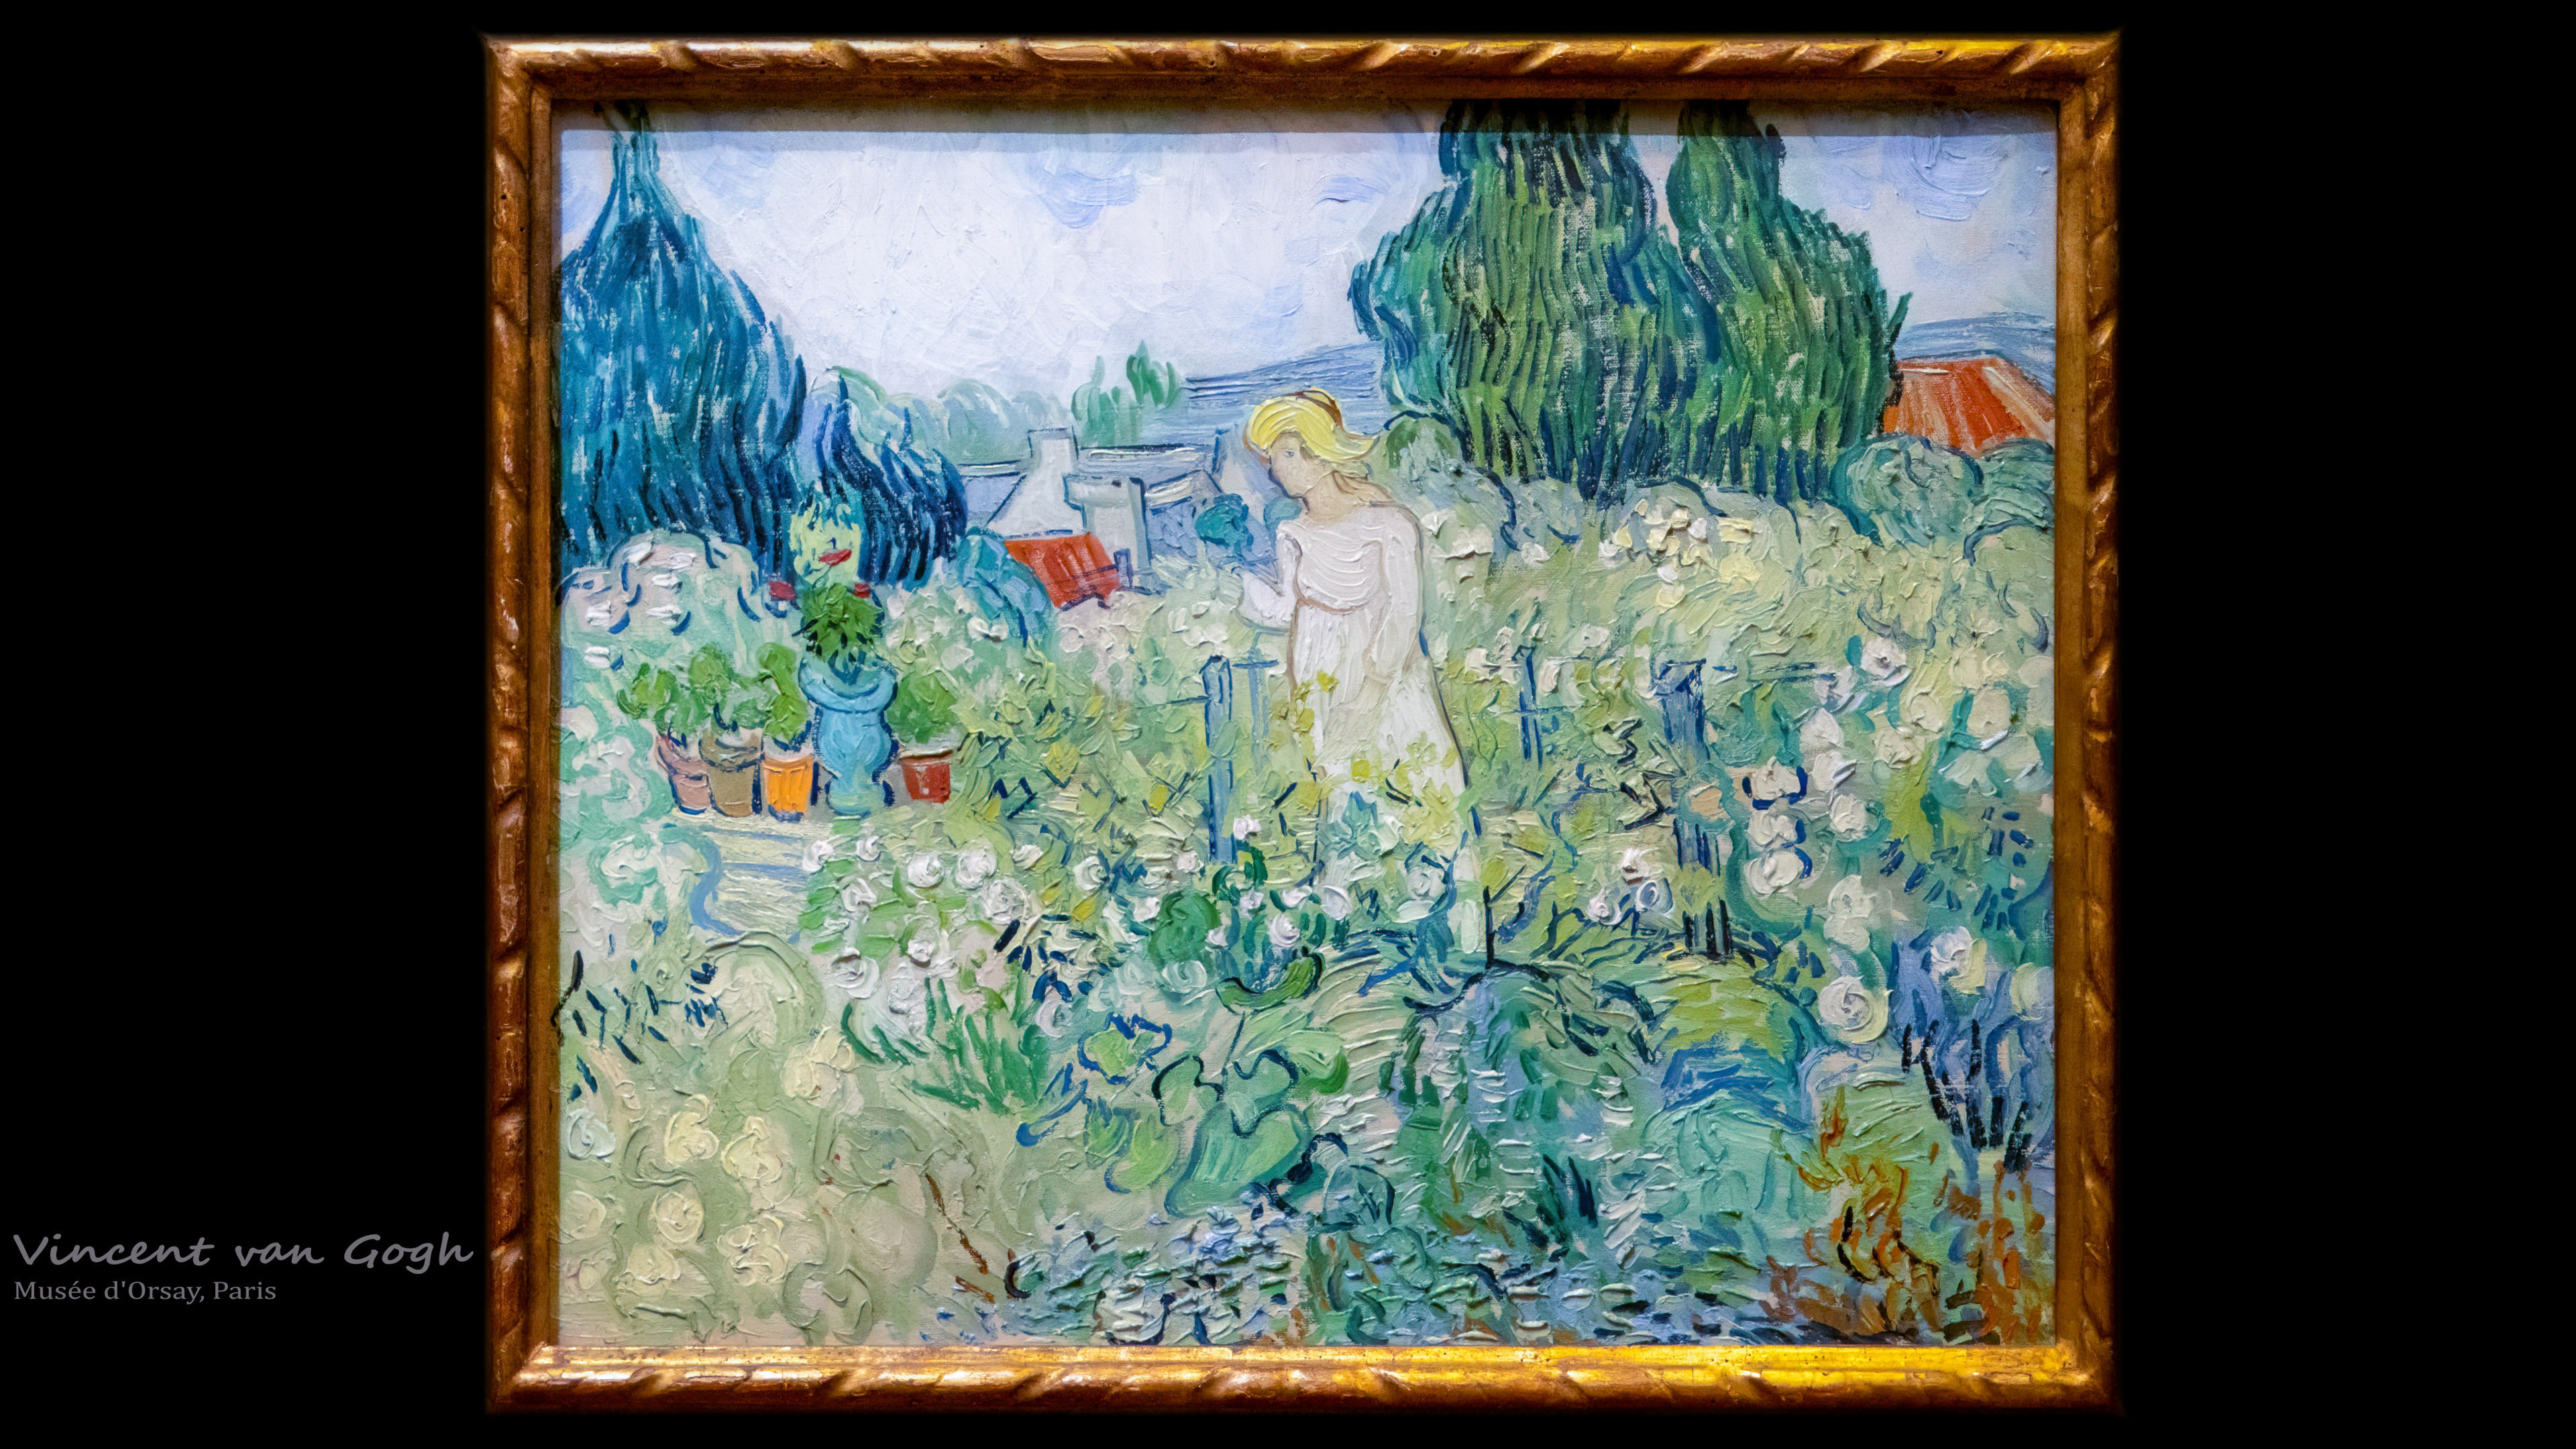 Wander through the vibrant gardens with Vincent van Gogh's Marguerite Gachet wallpaper, adding a touch of nature's beauty to your screen.